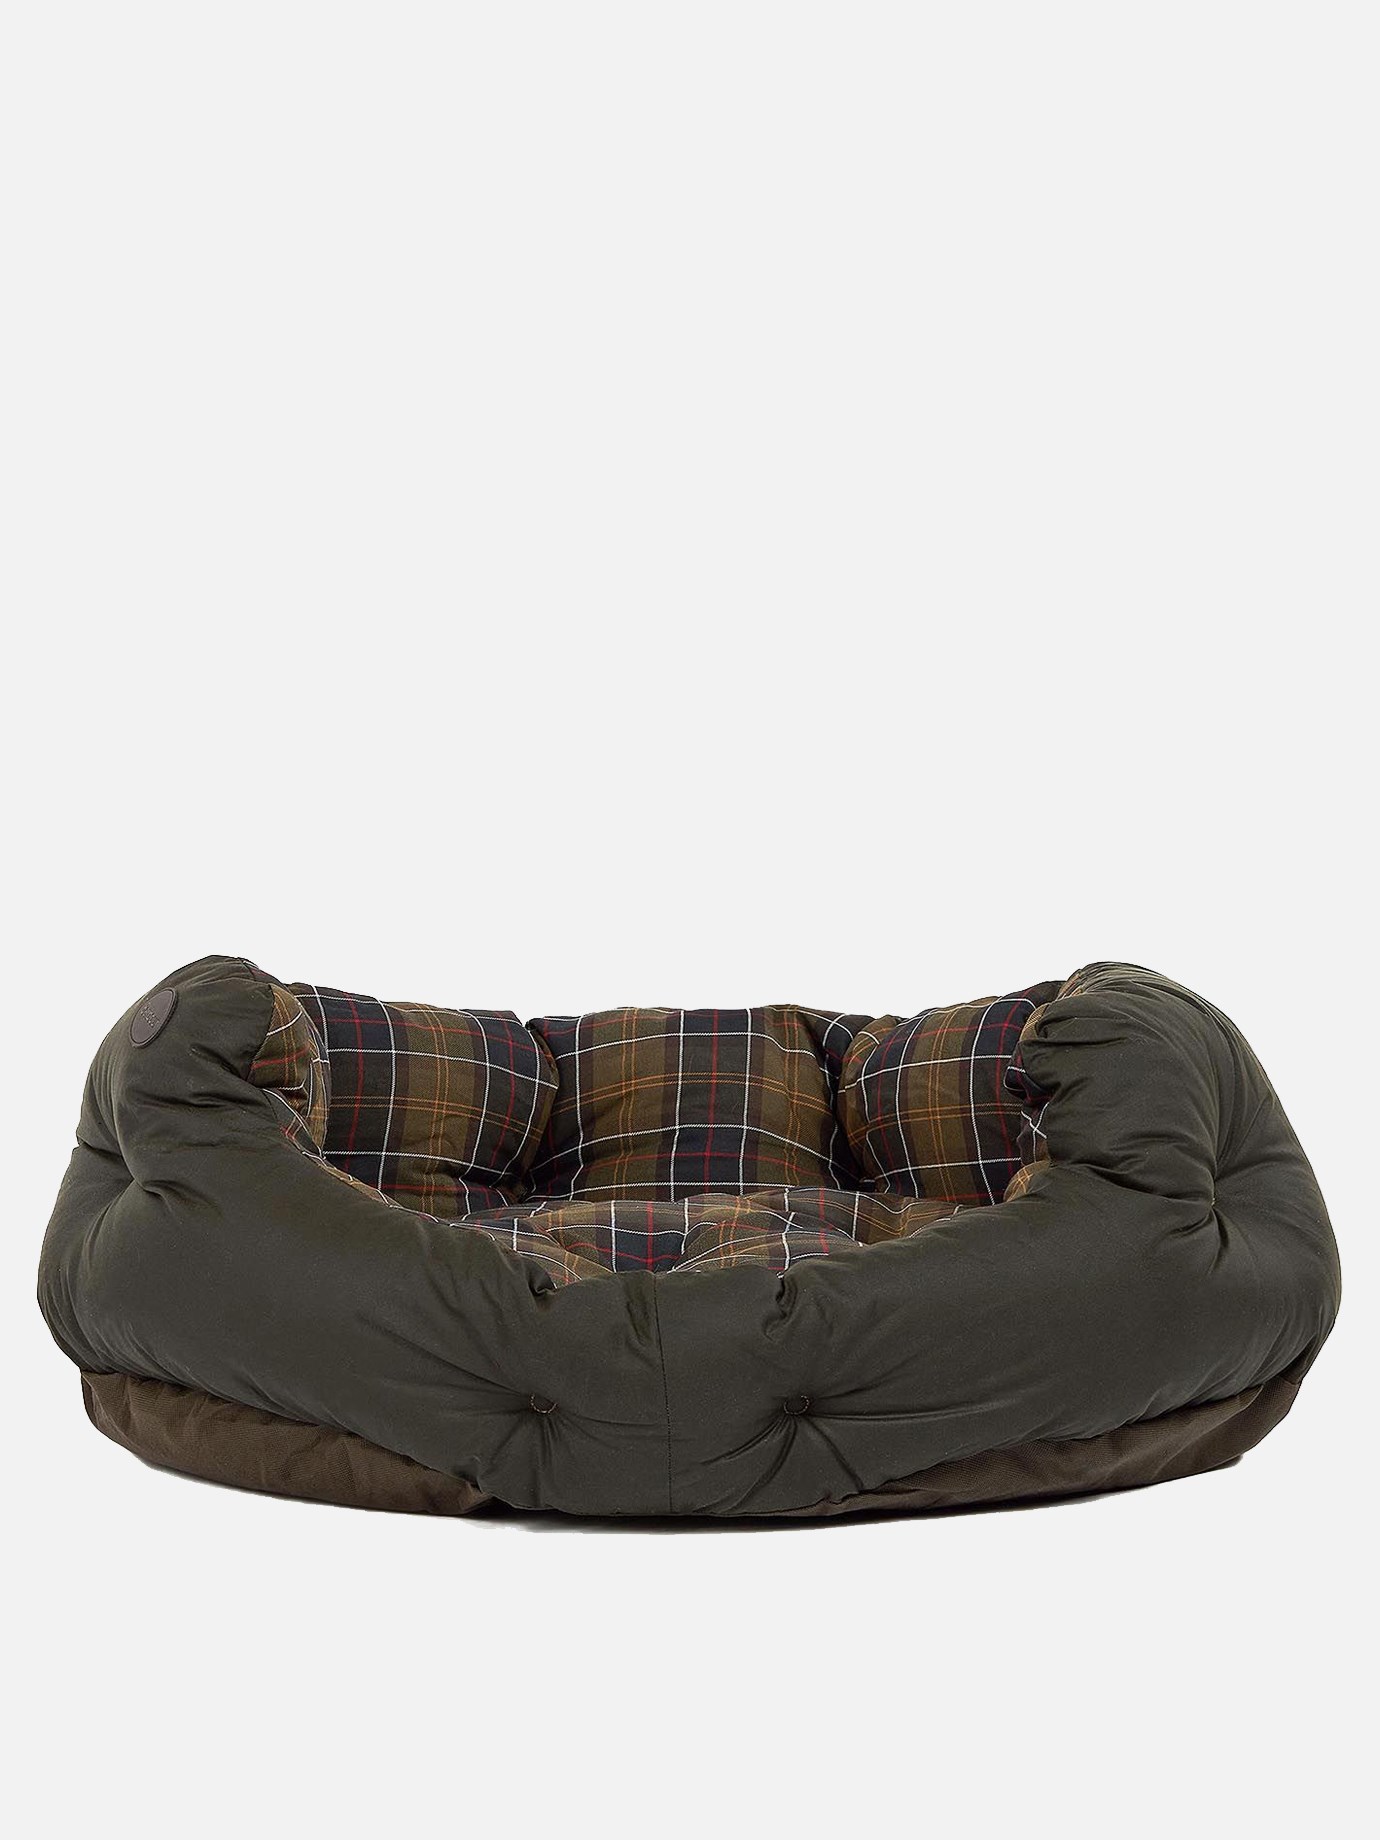 Waxed dog bedby Barbour - 2